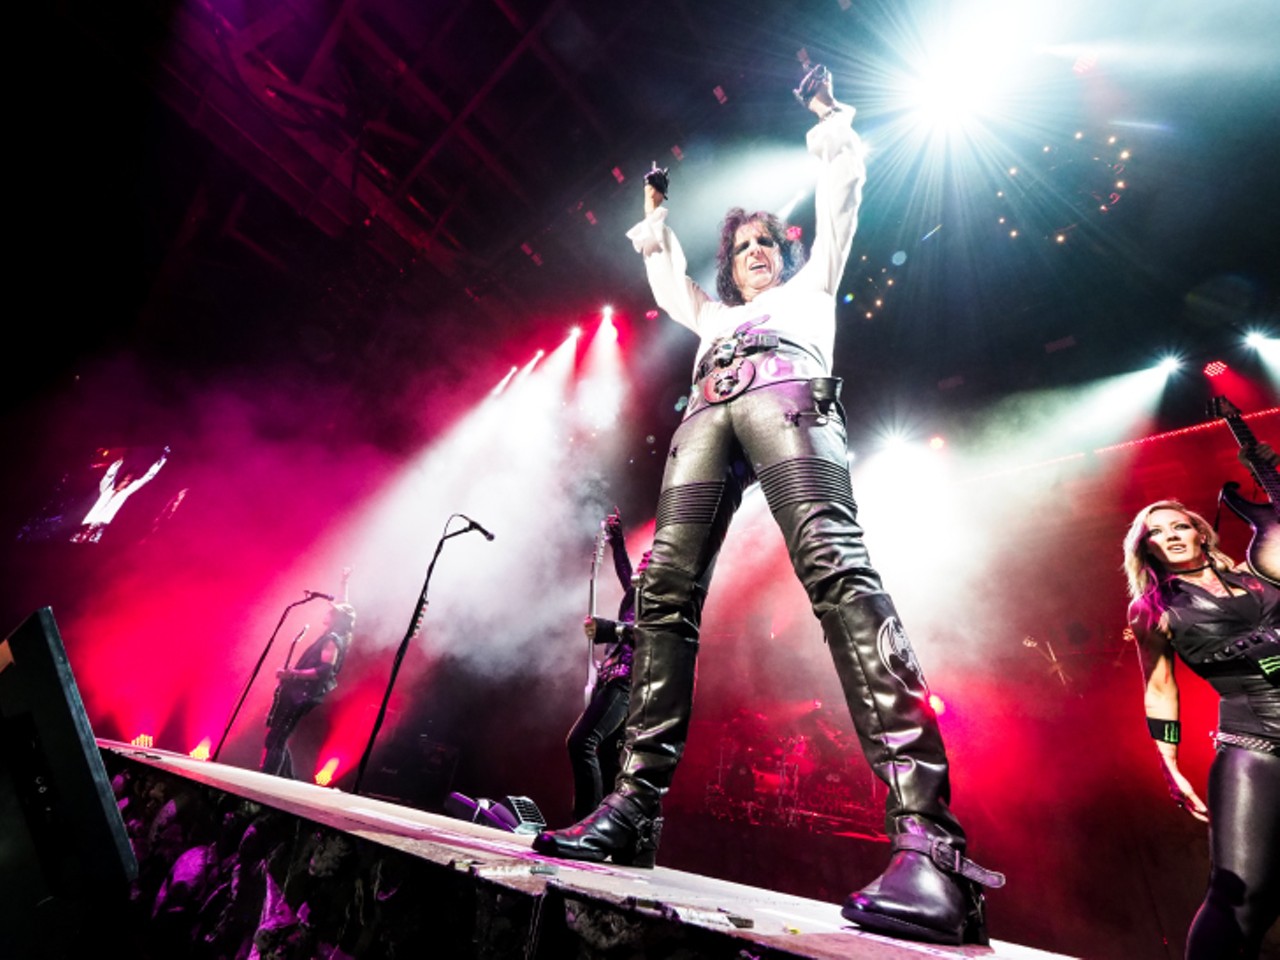 All the mayhem we saw at Alice Cooper and Halestorm at DTE Energy Music Theatre